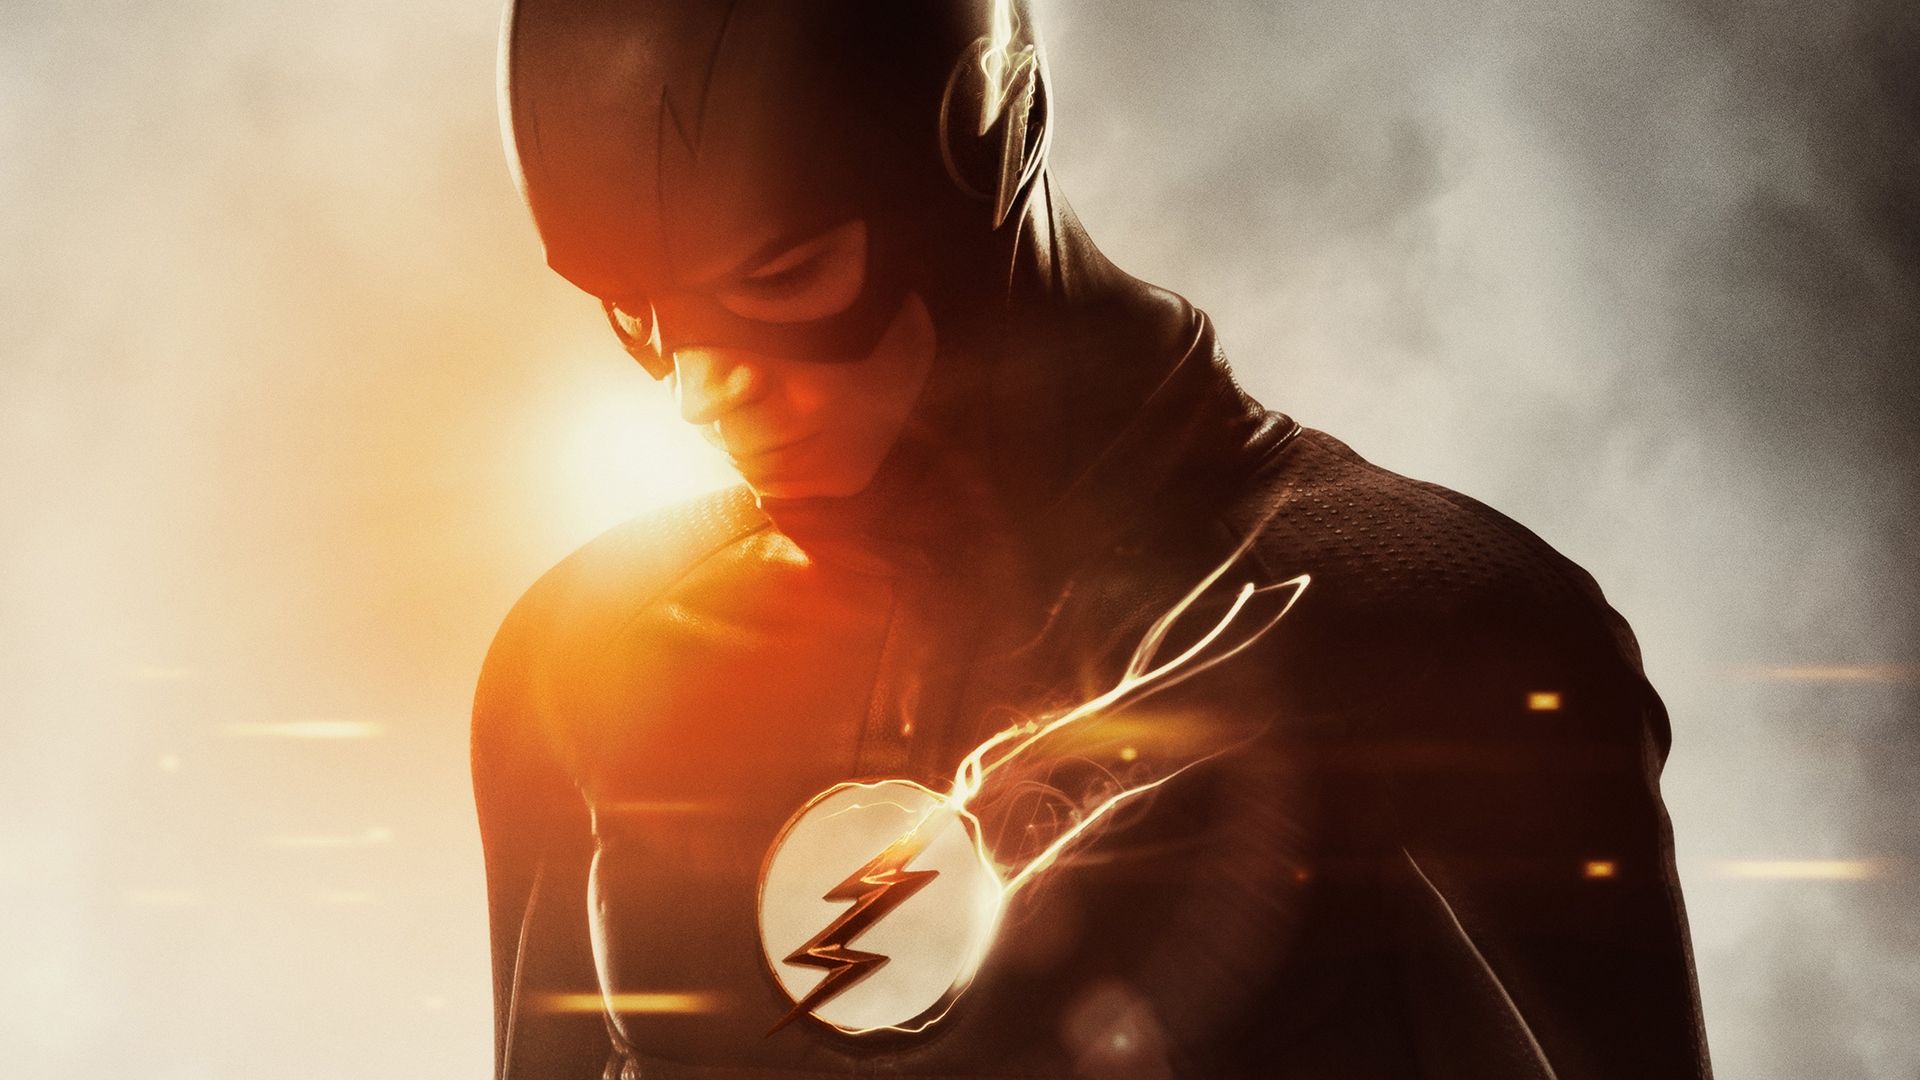 The Flash background